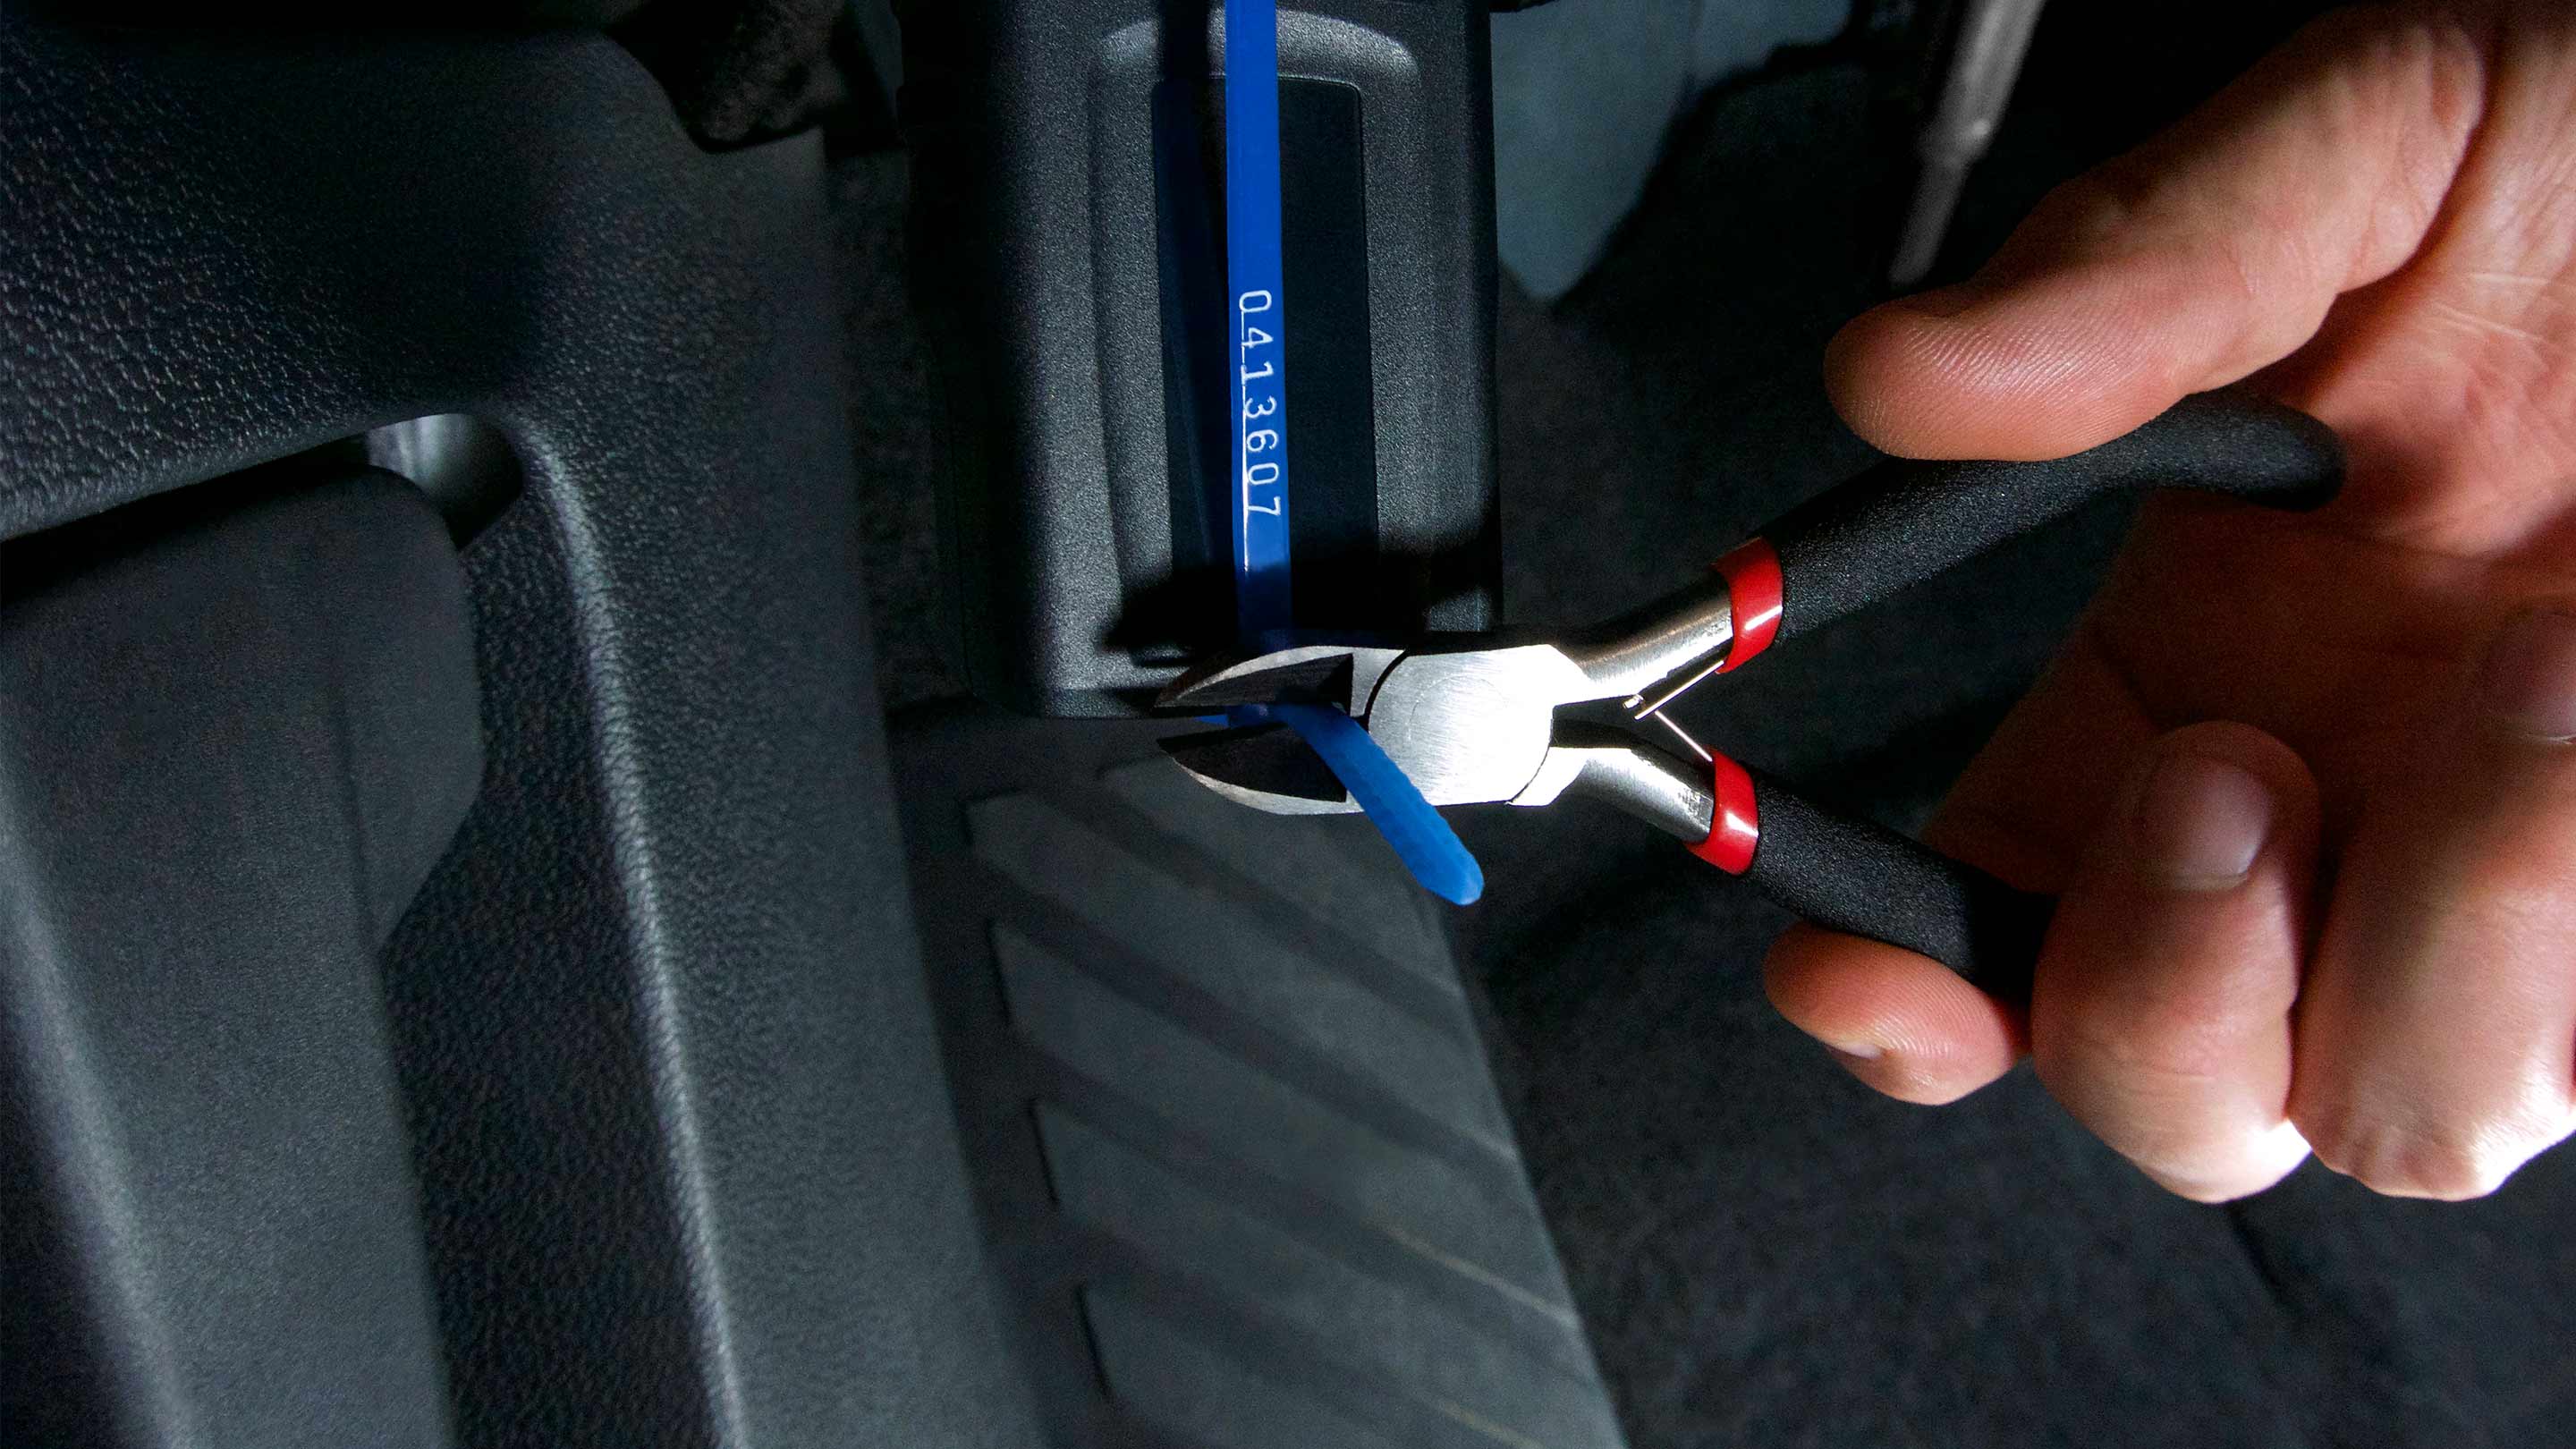 A hand holding pliers cutting a blue zip tie